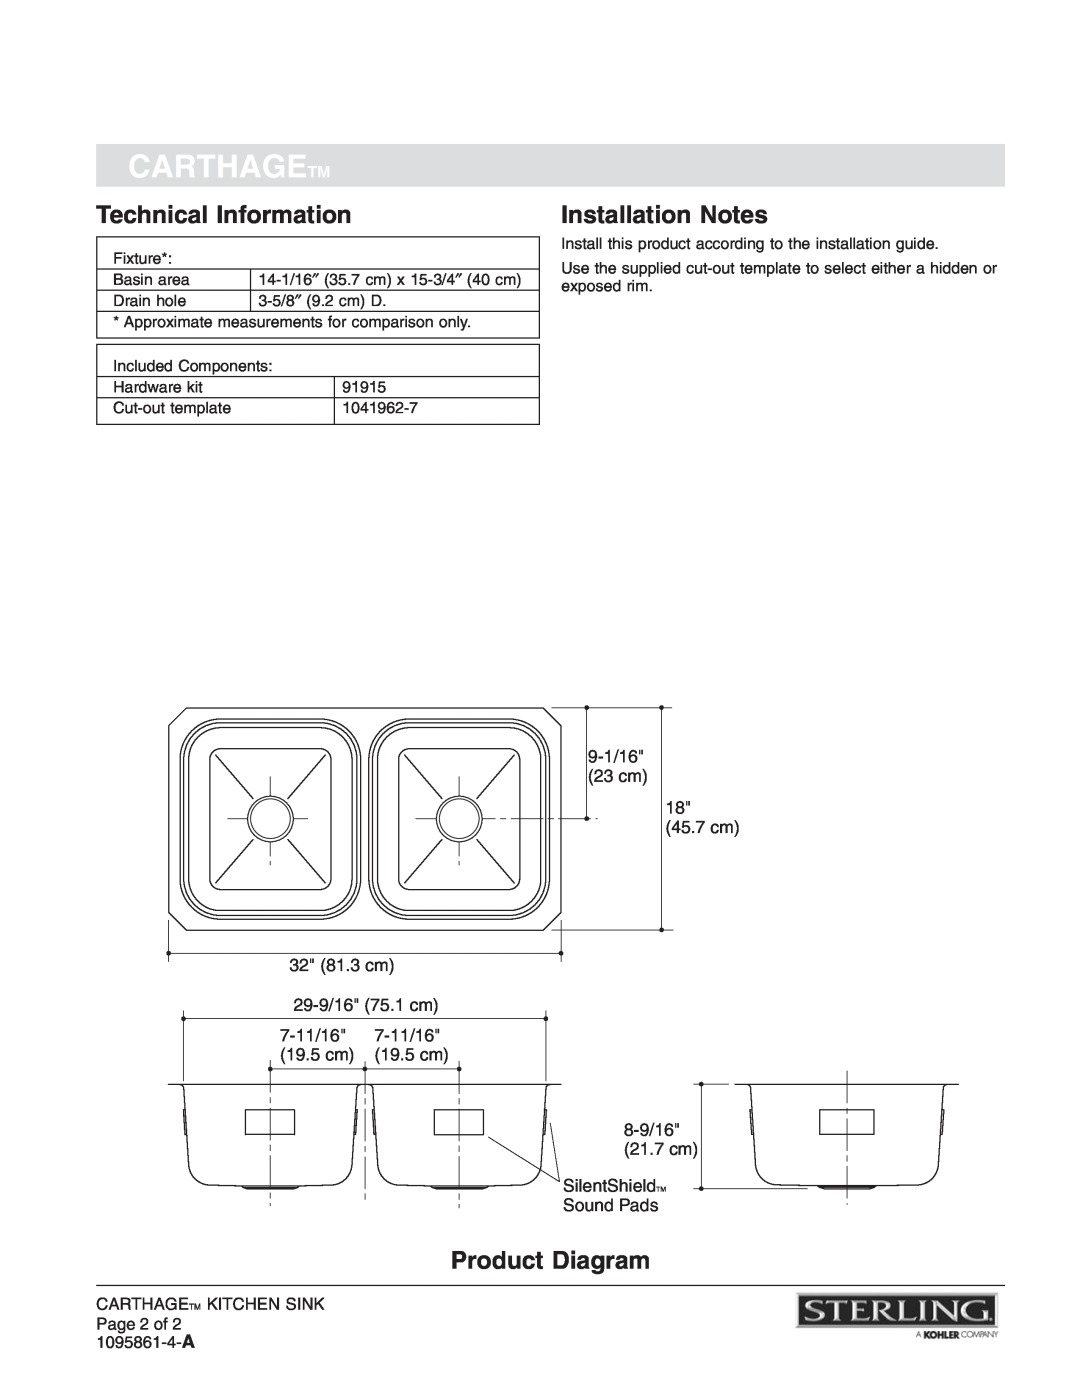 Sterling Plumbing 11445-NA Technical Information, Installation Notes, Product Diagram, Carthagetm, 7-11/16, 19.5 cm 